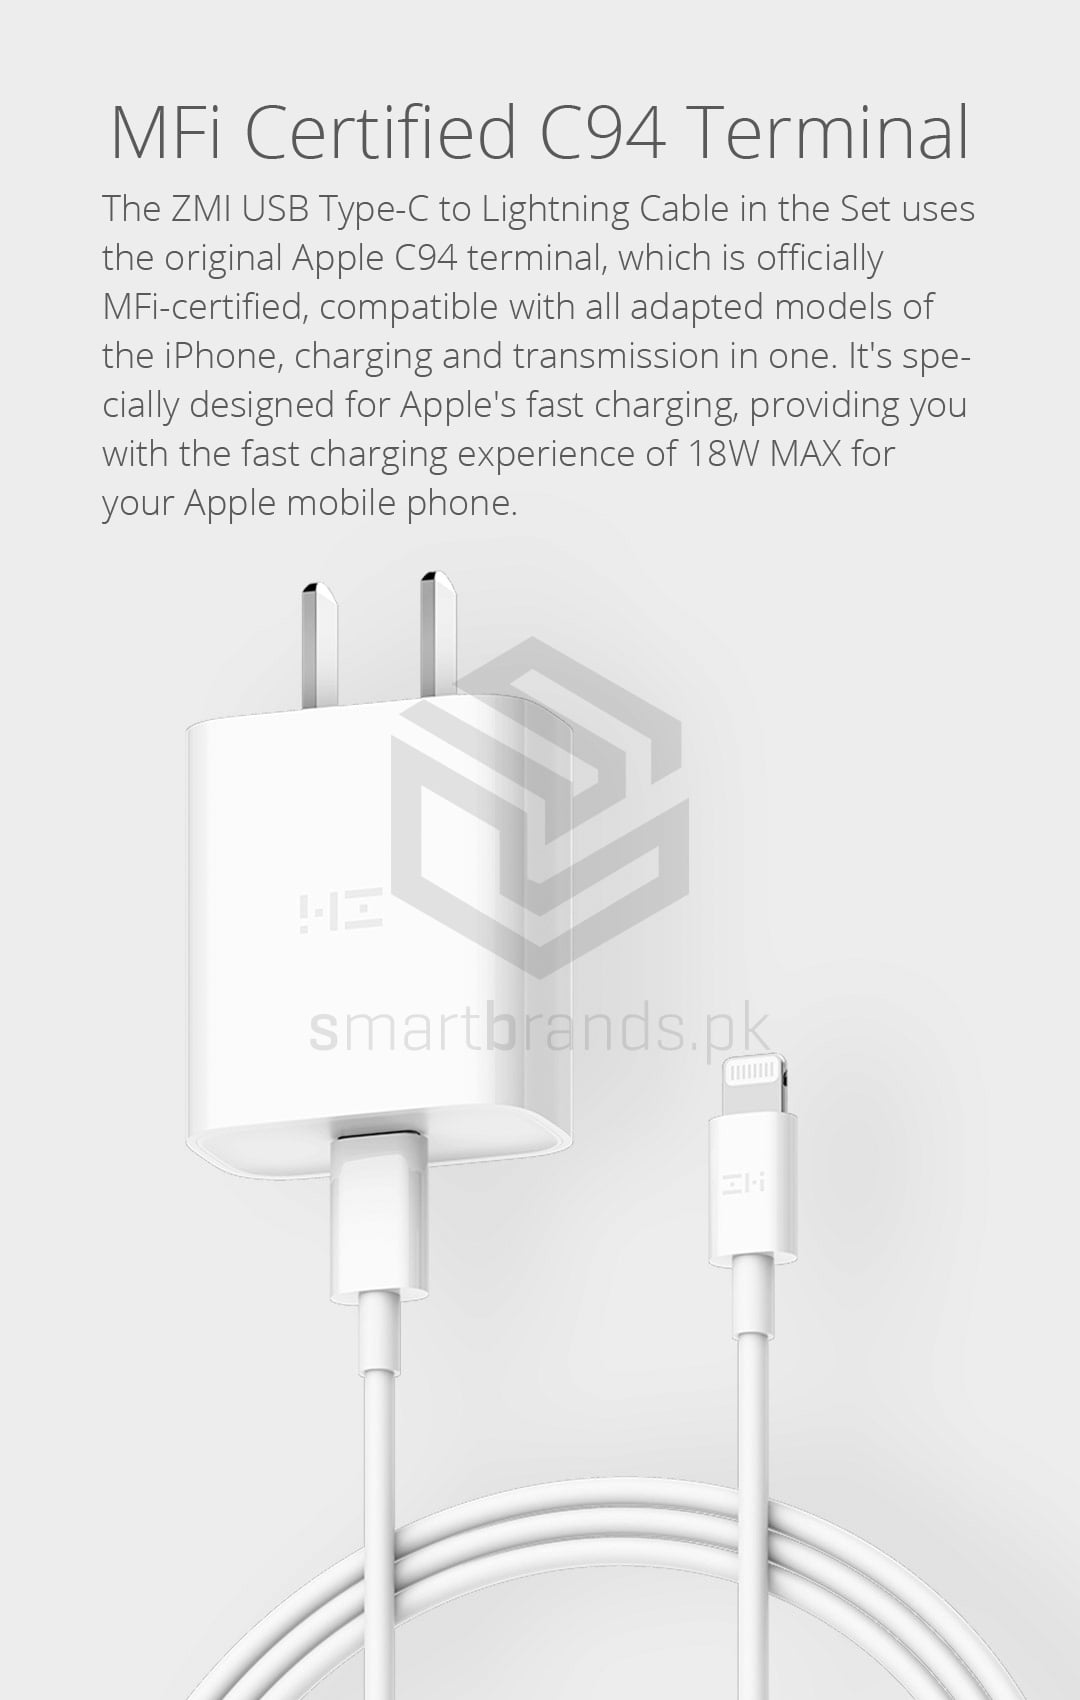 MFi Certified C94 Terminal. The ZMI USB Type-C to Lightning Cable in the Set uses the original Apple C94 terminal, which is officially MFi-certified, compatible with all adapted models of the iPhone, charging and transmission in one. It's specially designed for Apple's fast charging, providing you with the fast charging experience of 18W MAX for your Apple mobile phone.